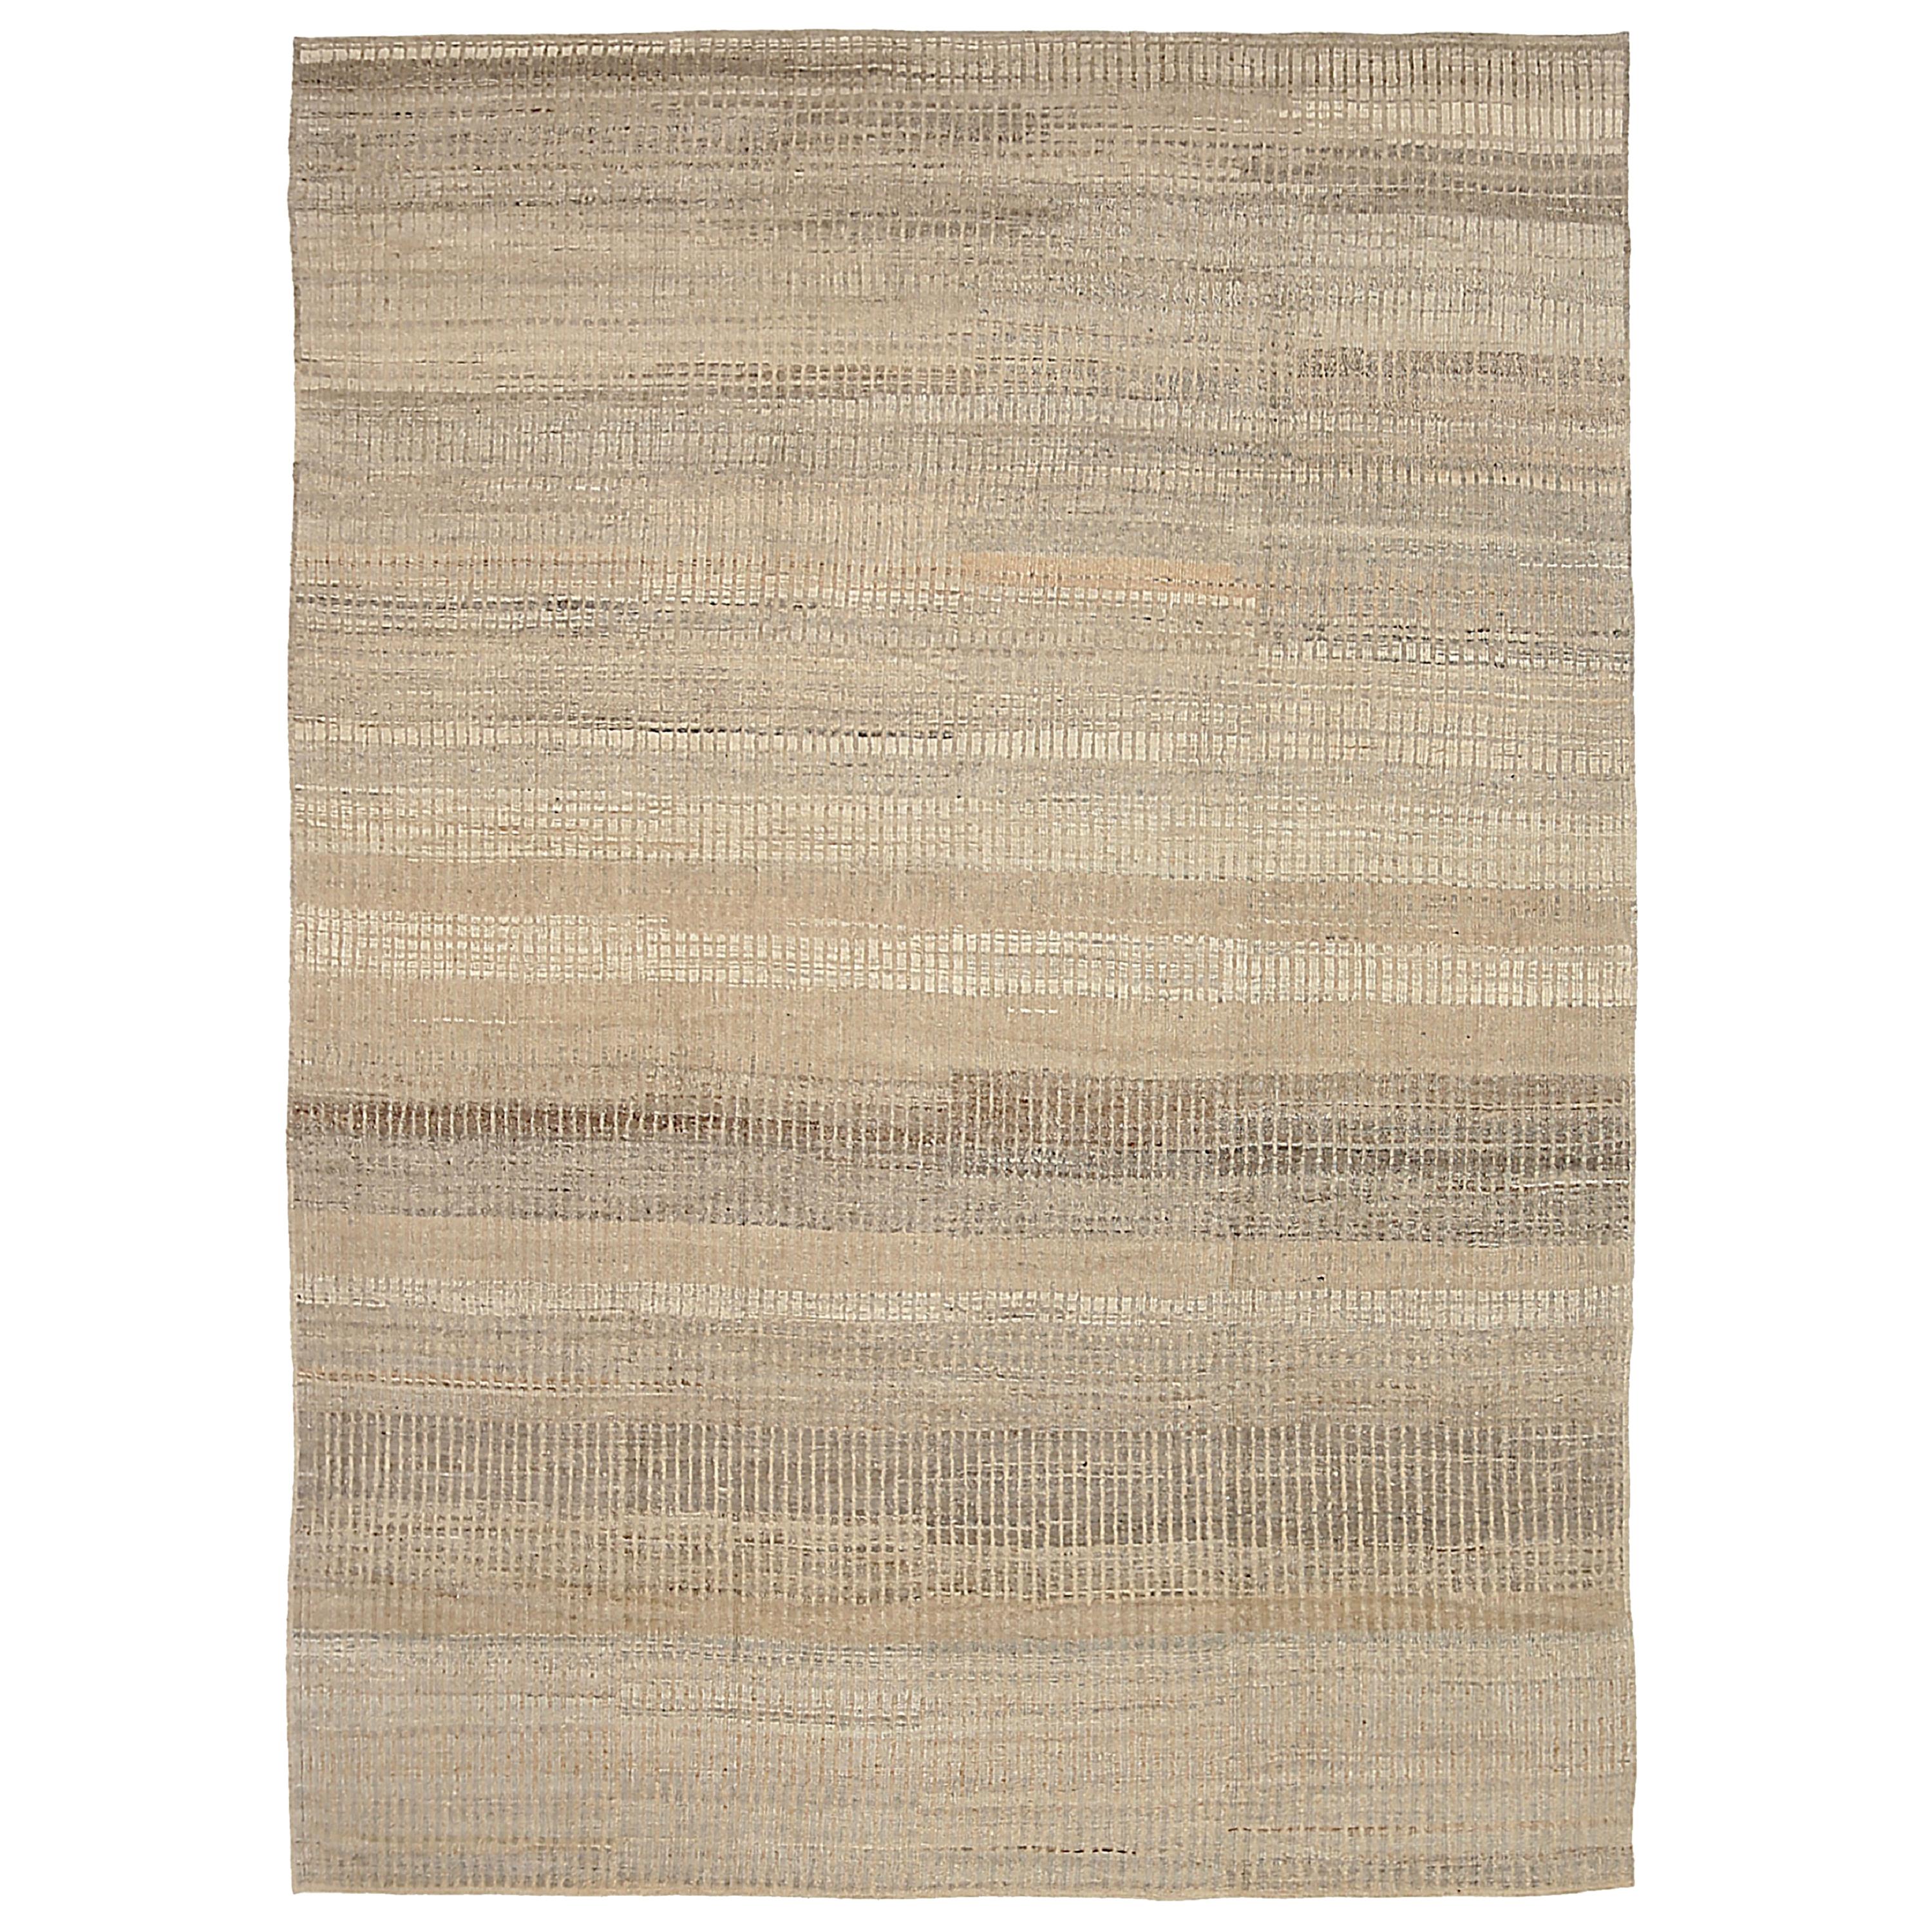 Nazmiyal Collection Taupe Textured Modern Distressed Rug. 9 ft 2 in x 12 ft 1 in